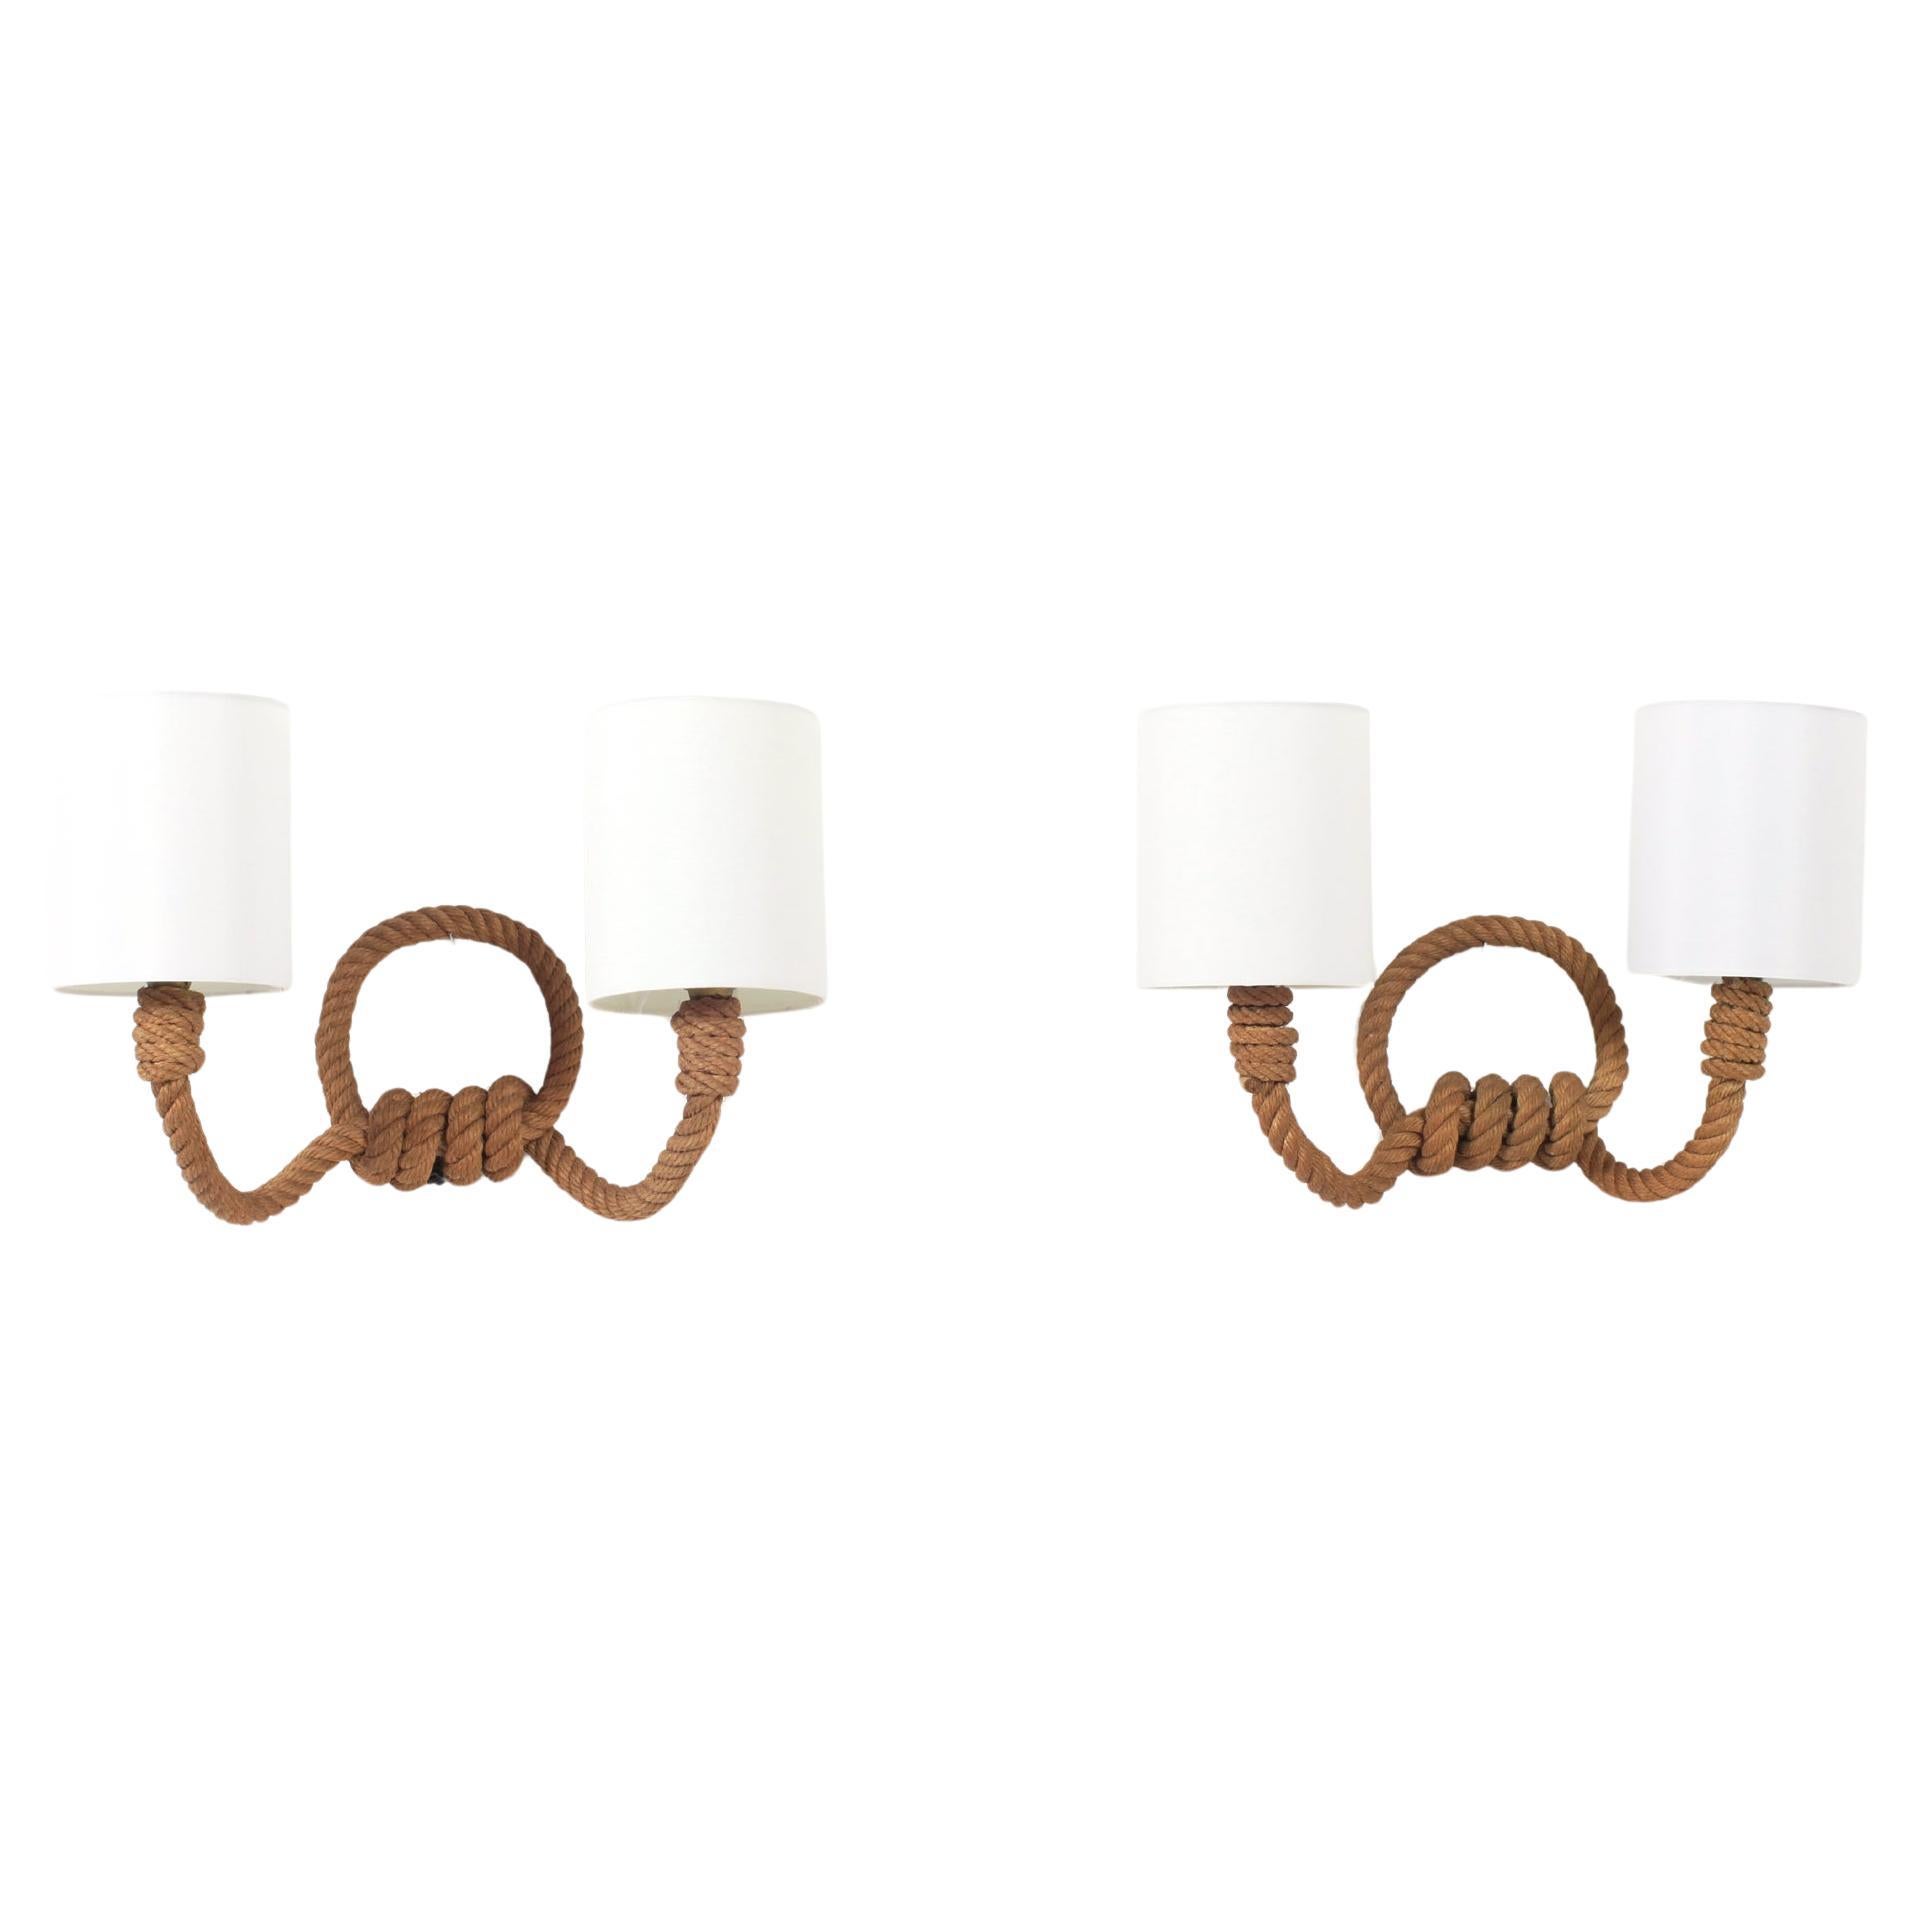 Audoux-Minet Pair of Two Lights Rope Sconces, France, 1950